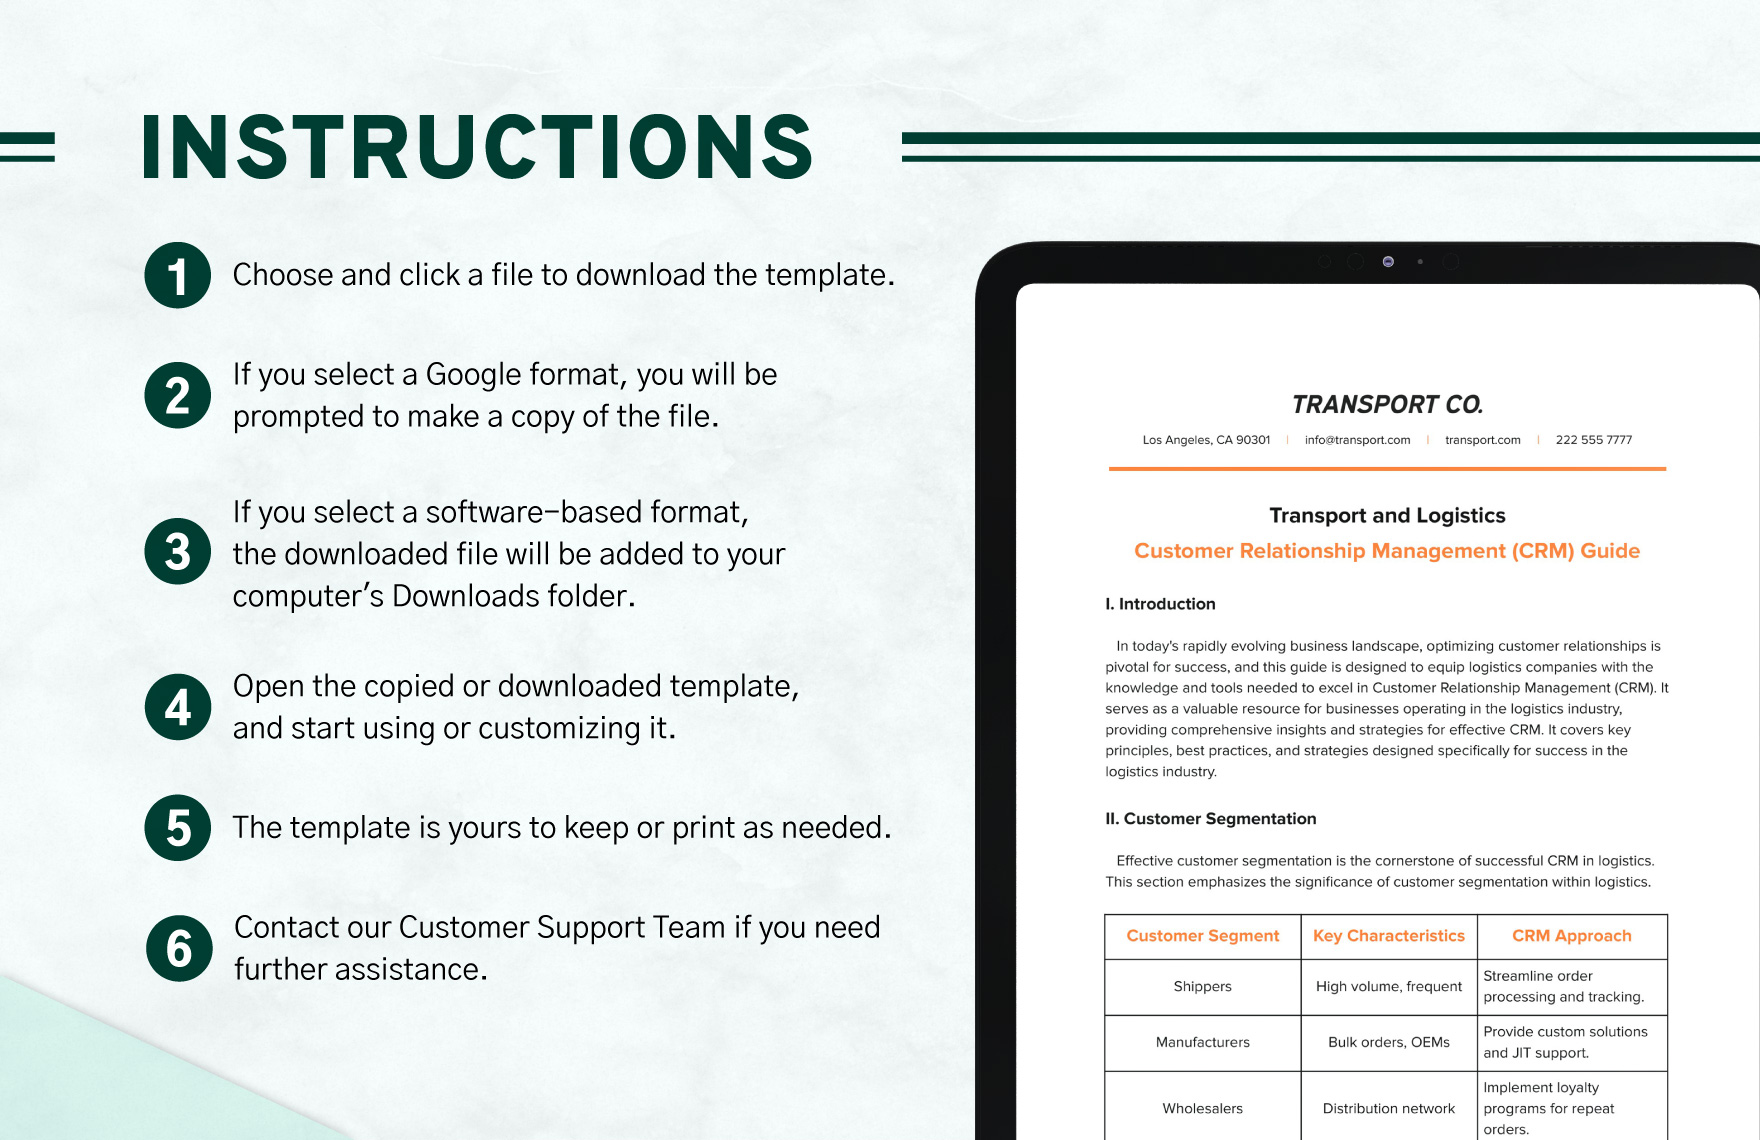 Transport and Logistics Customer Relationship Management (CRM) Guide Template